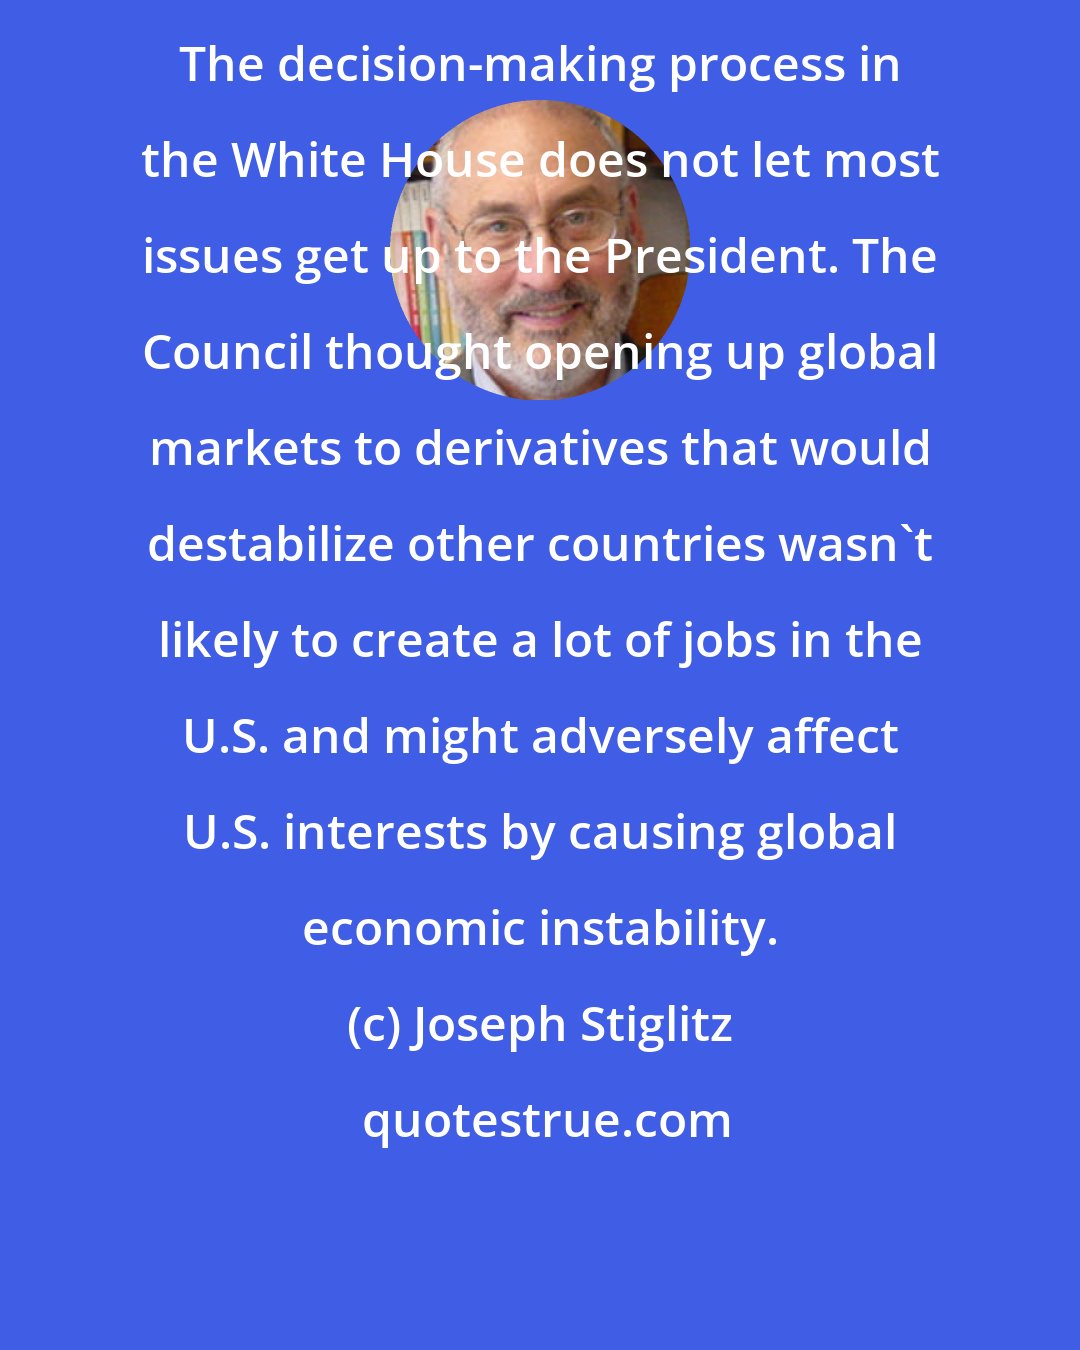 Joseph Stiglitz: The decision-making process in the White House does not let most issues get up to the President. The Council thought opening up global markets to derivatives that would destabilize other countries wasn't likely to create a lot of jobs in the U.S. and might adversely affect U.S. interests by causing global economic instability.